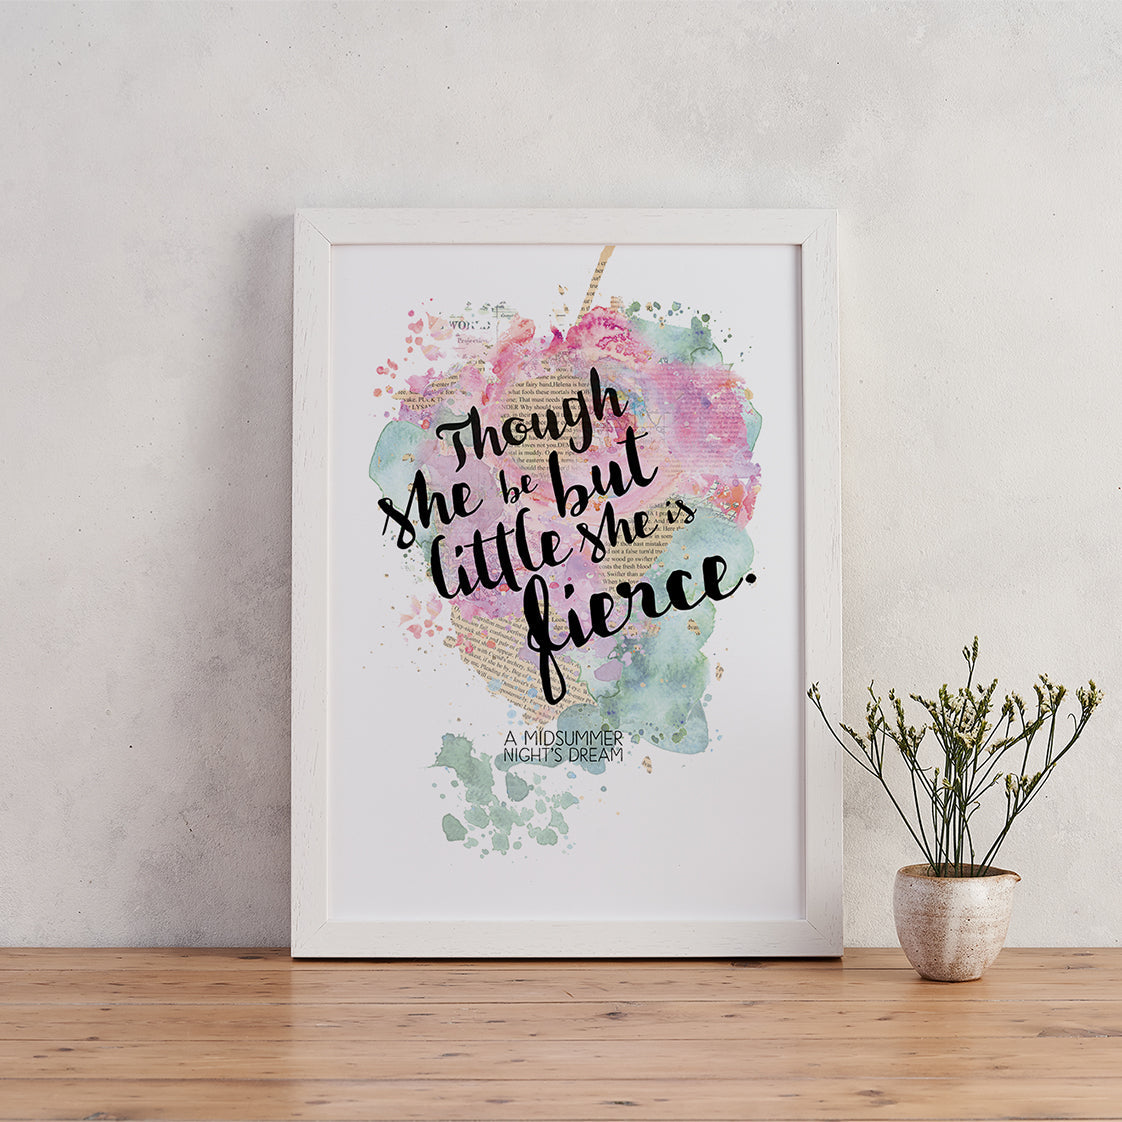 watercolour art 'though she be but little she is fierce' shakespeare quote print